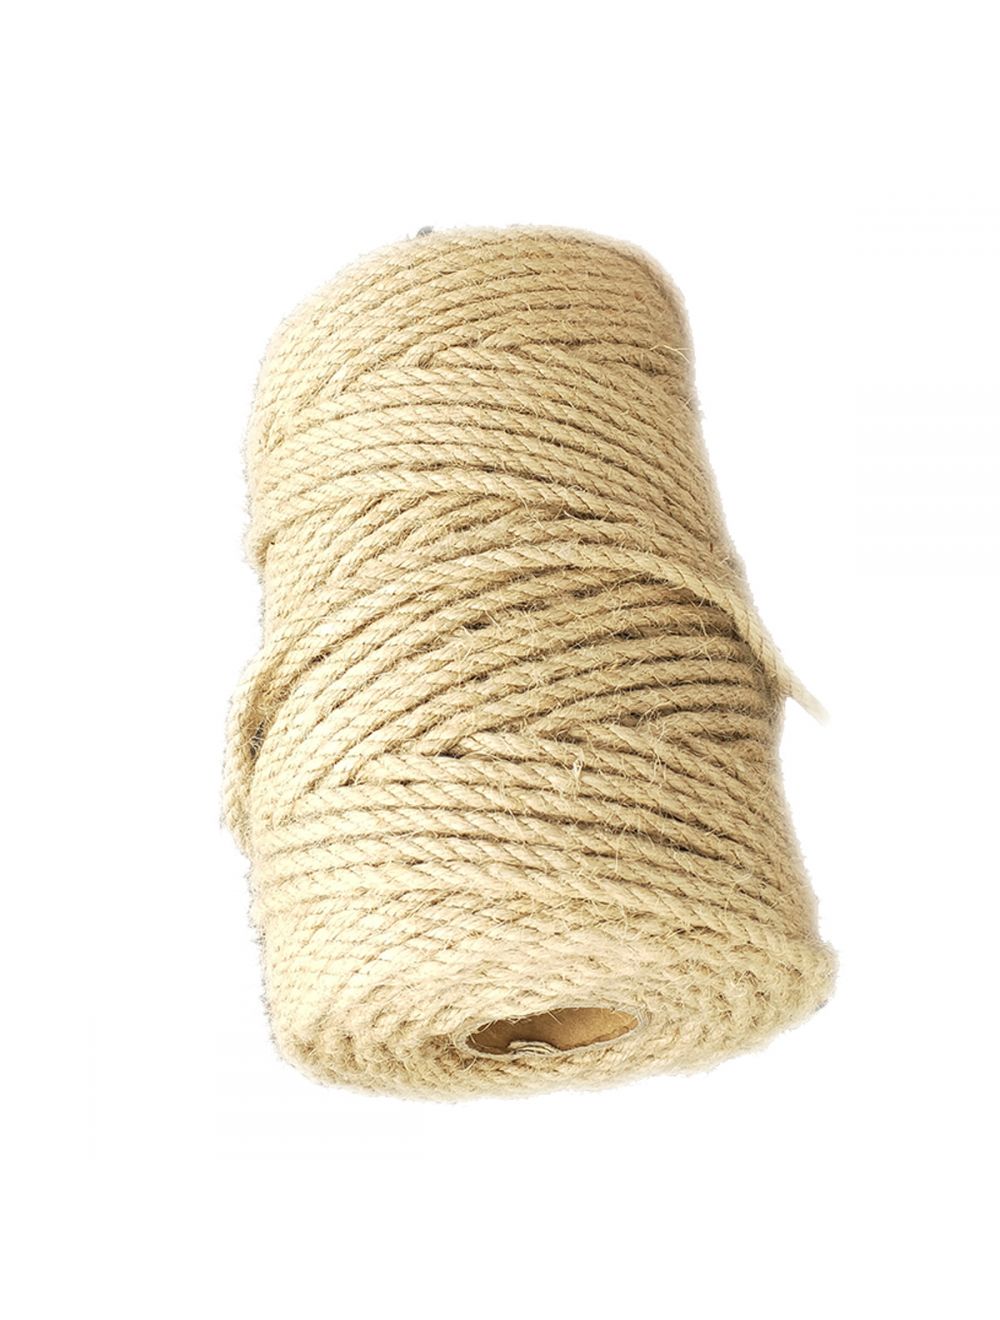 Hemp Twine String For Crafts Colorful Twine String Solid Yarn